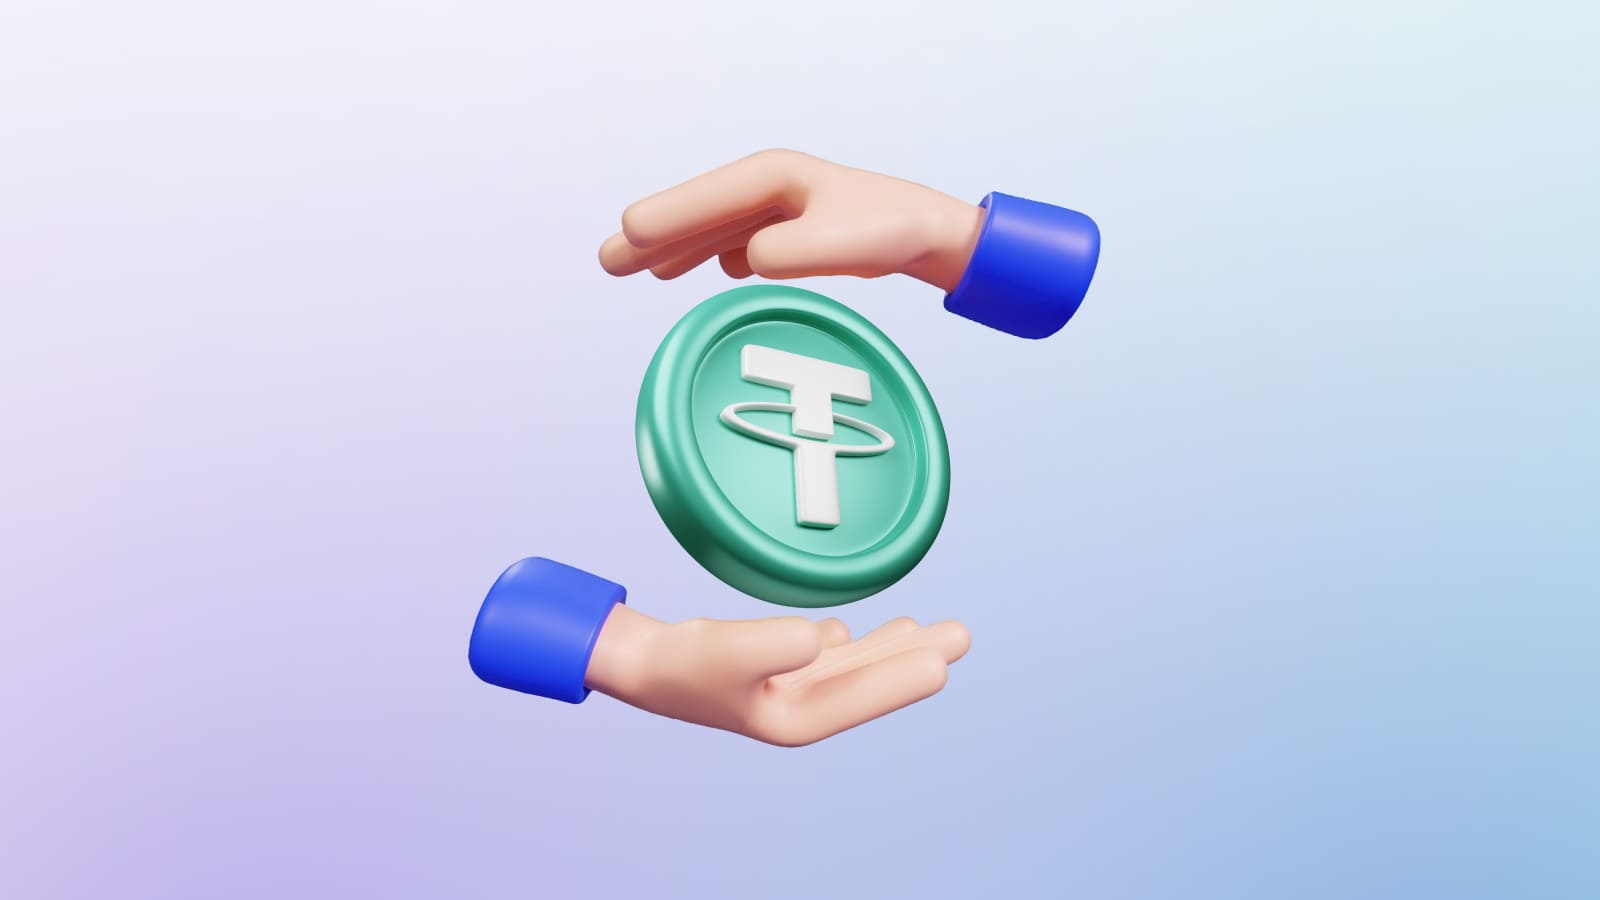 There are several ways to withdraw Tether to your card.